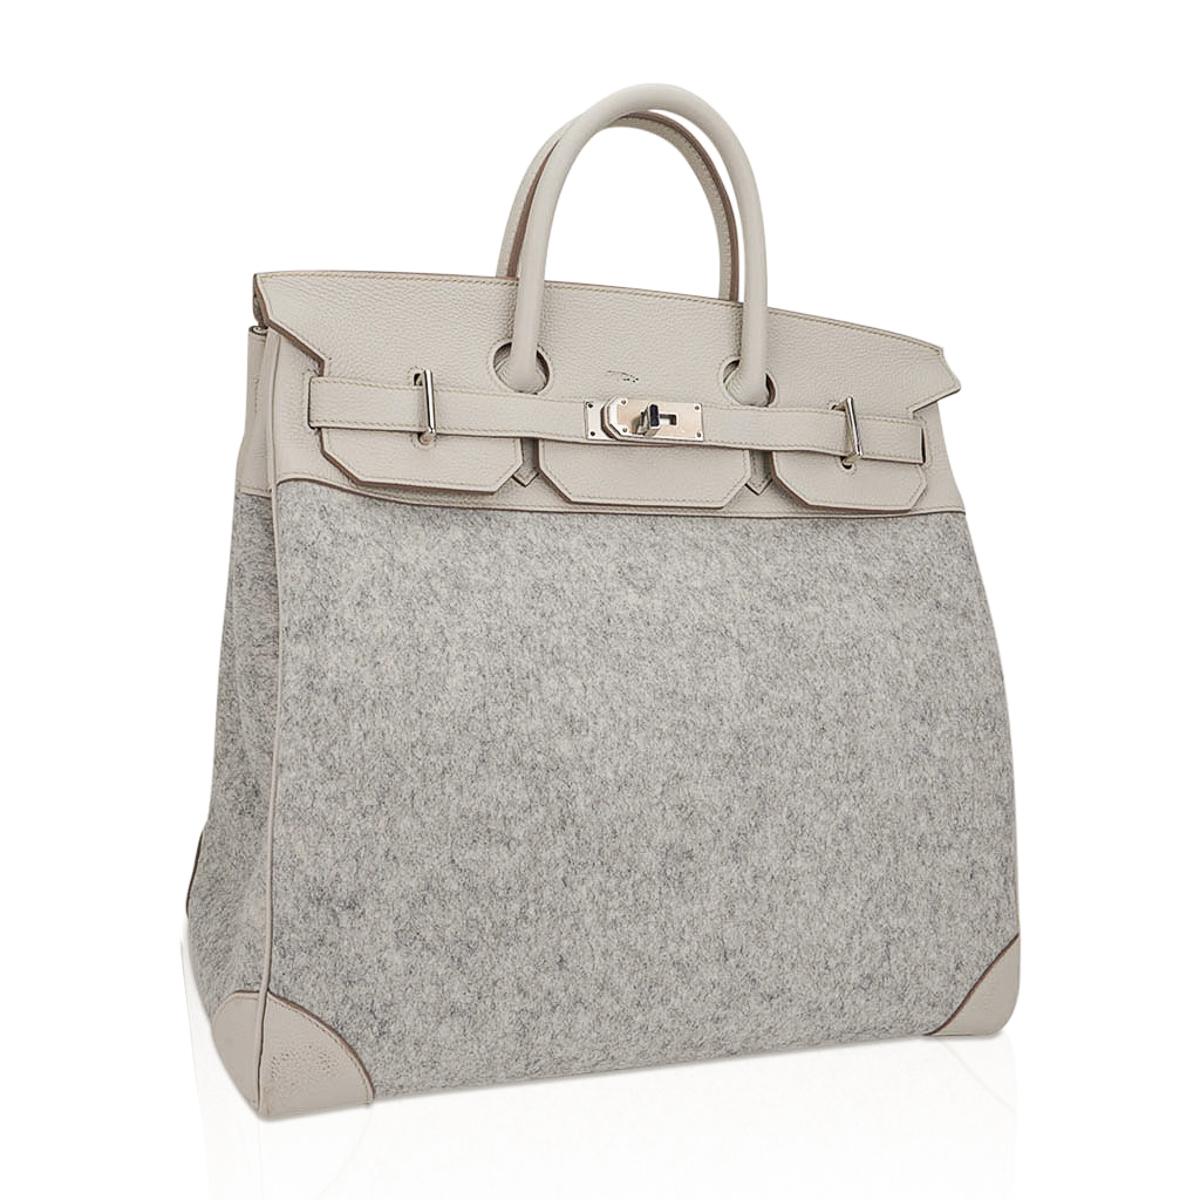 Mightychic offers a rare limited edition Hermes HAC 40 bag featured in Gris Clair Todoo Feutre (Wool) and Craie Togo leather.
A chic and masculine combination for this rare Hermes classic bag.
Beautiful light gray and Craie combination this tote bag